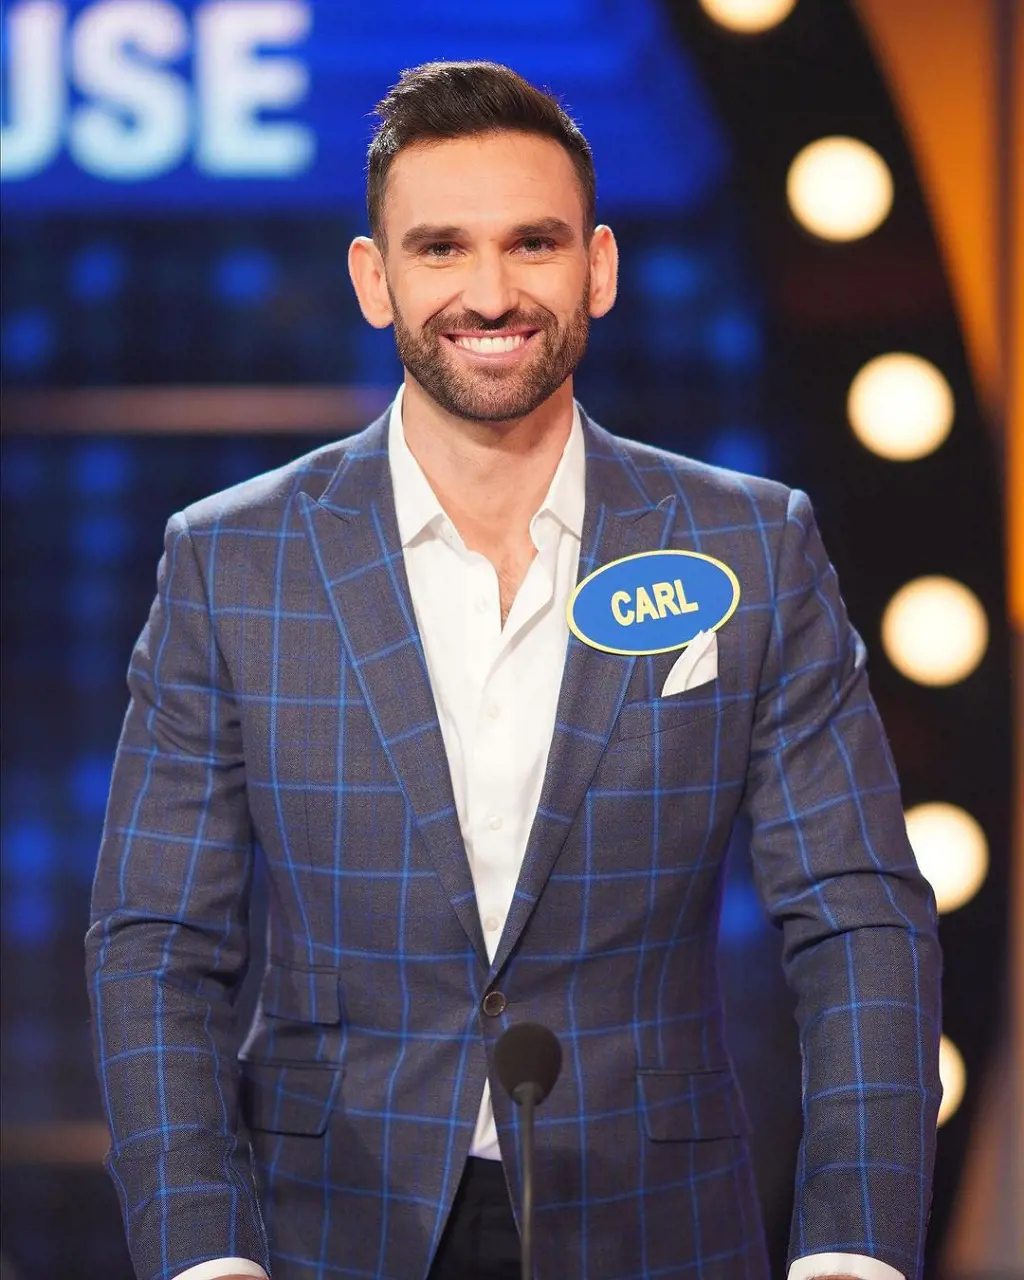 Carl representing the team Summer House on Celebrity Family Feud CBS Studios on August 15 2022